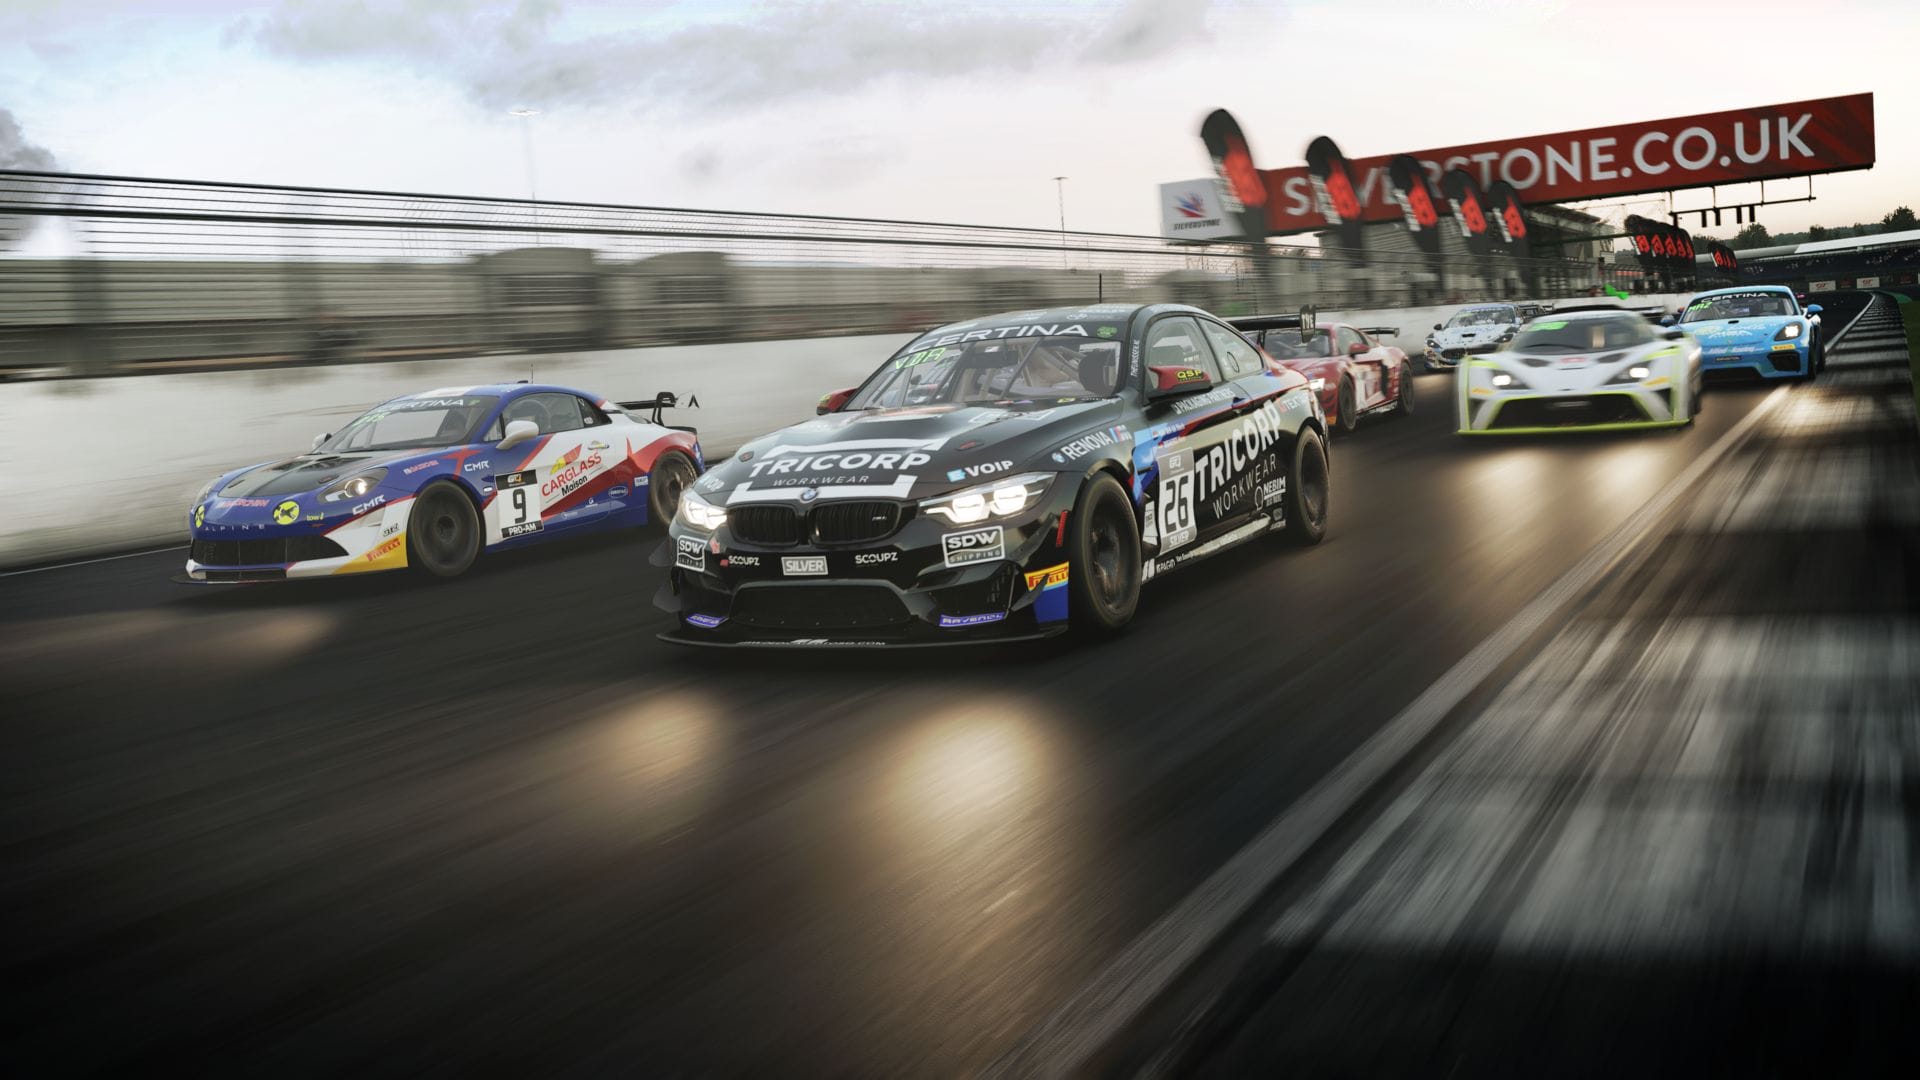 Assetto Corsa Competizione v1.5 and GT4 Pack DLC out now